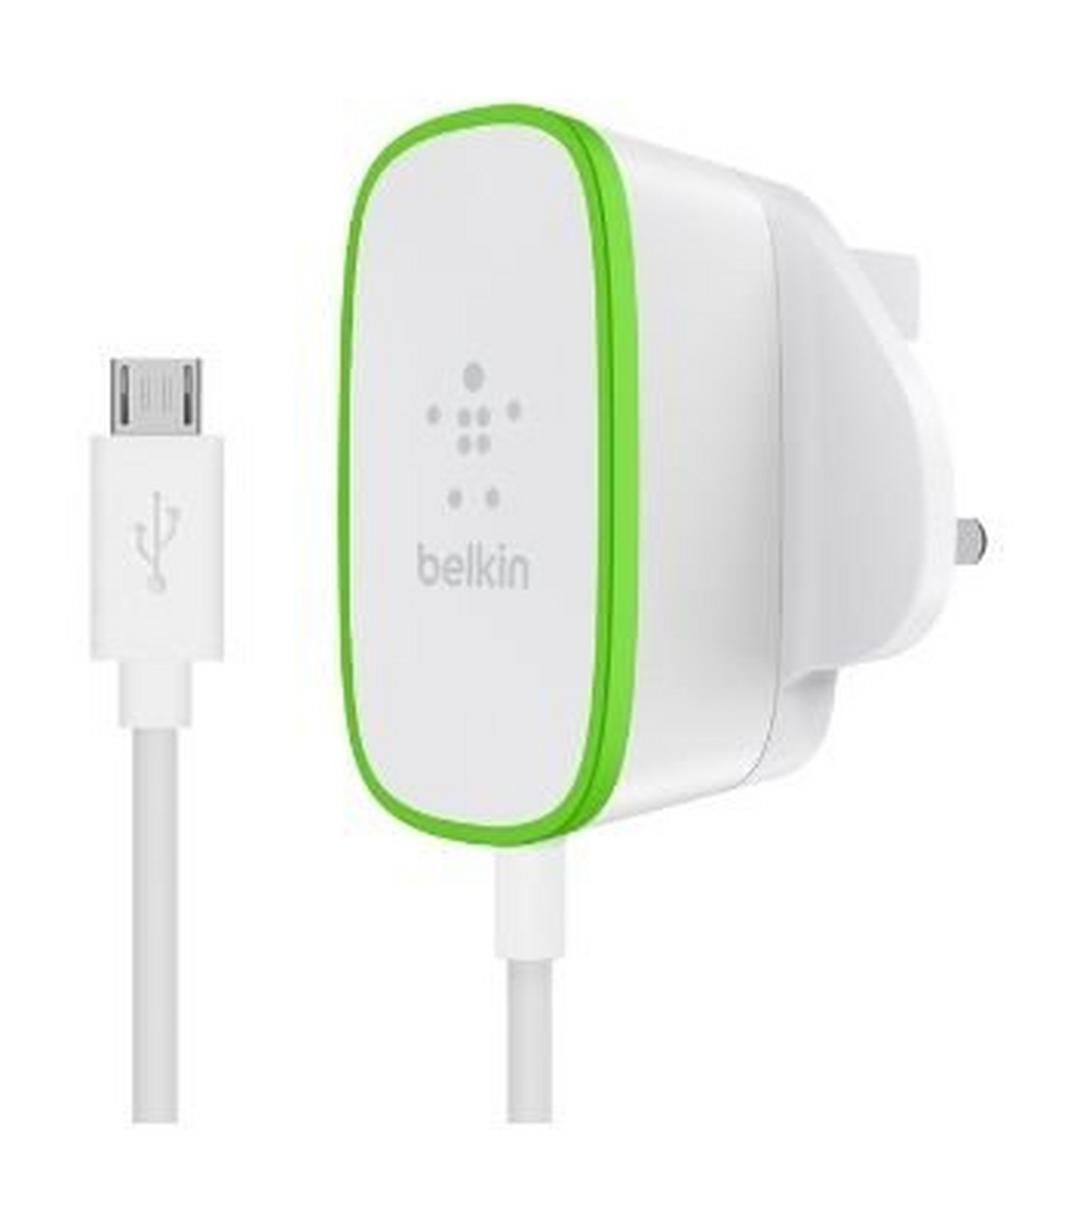 Belkin Home Charger With Micro-USB Cable - 1.8 Meter (F7U009DR06) - White